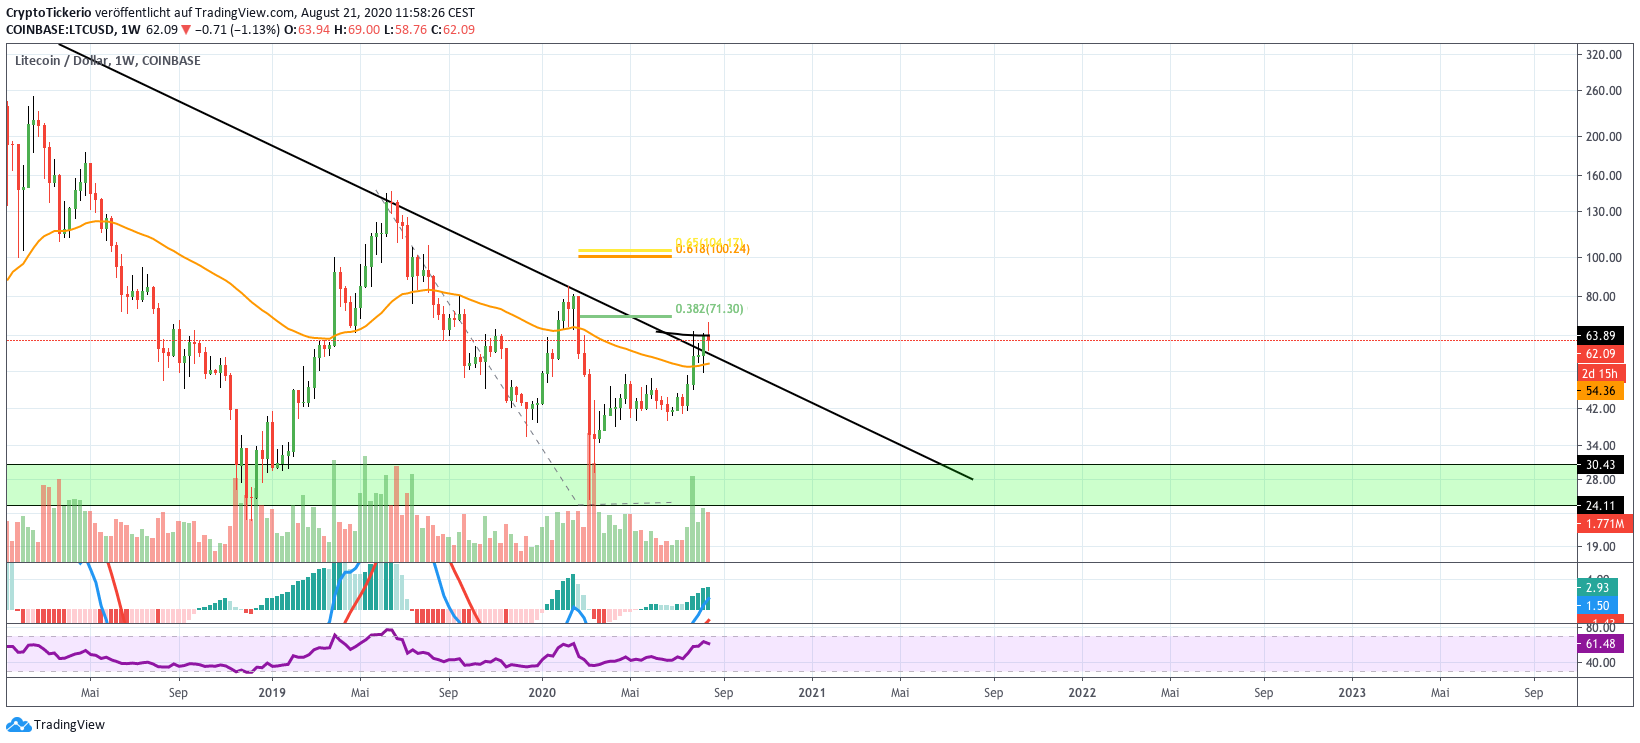 LTCUSD weekly chart on tradingview